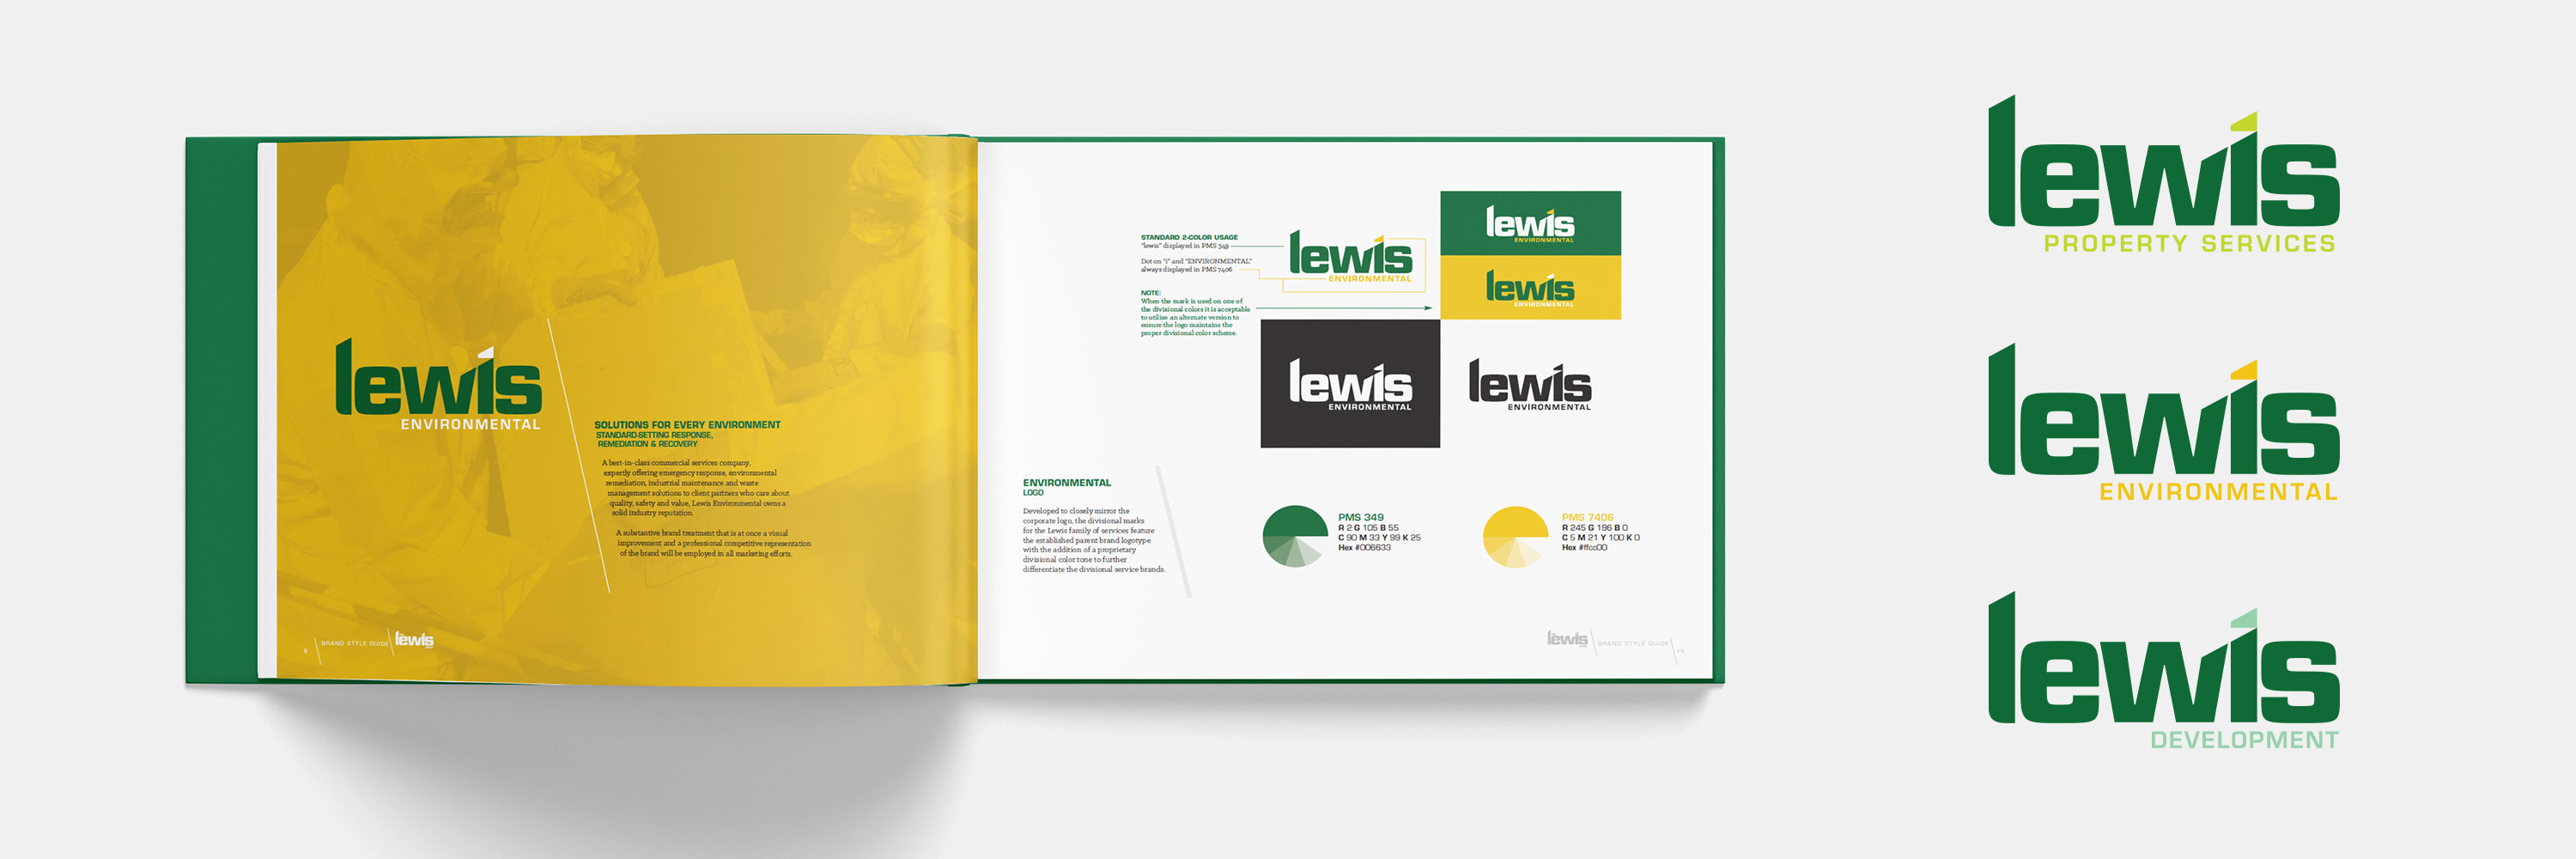 Lewis Group Corporate Brand and Divisional Standards